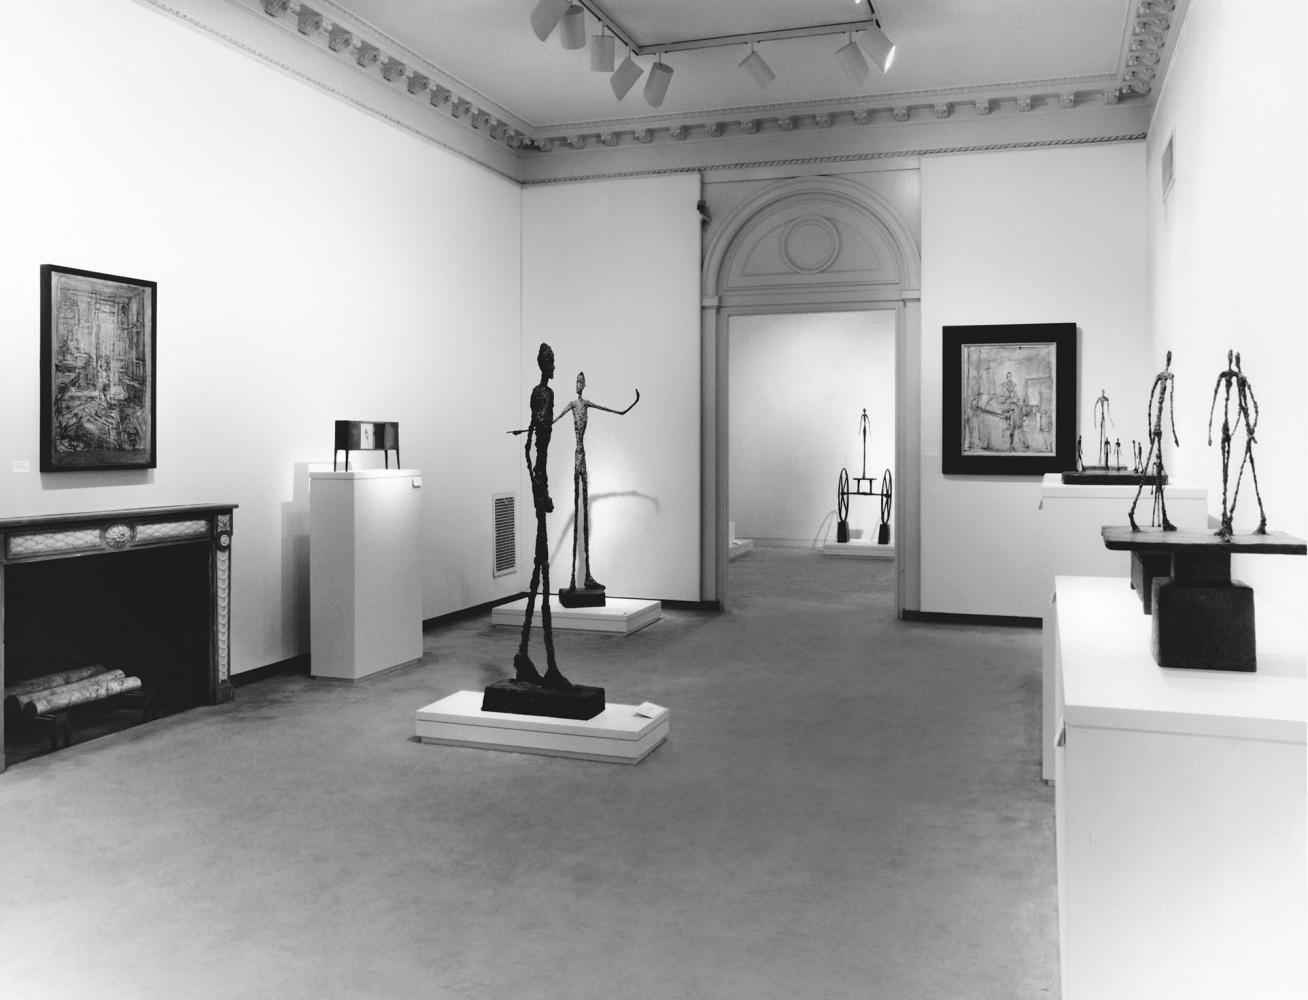 Installation view of&nbsp;Alberto Giacometti&nbsp;exhibition, fall 1994. Art&nbsp;&copy; Alberto Giacometti Estate / Licensed by VAGA and ARS, New York, NY.